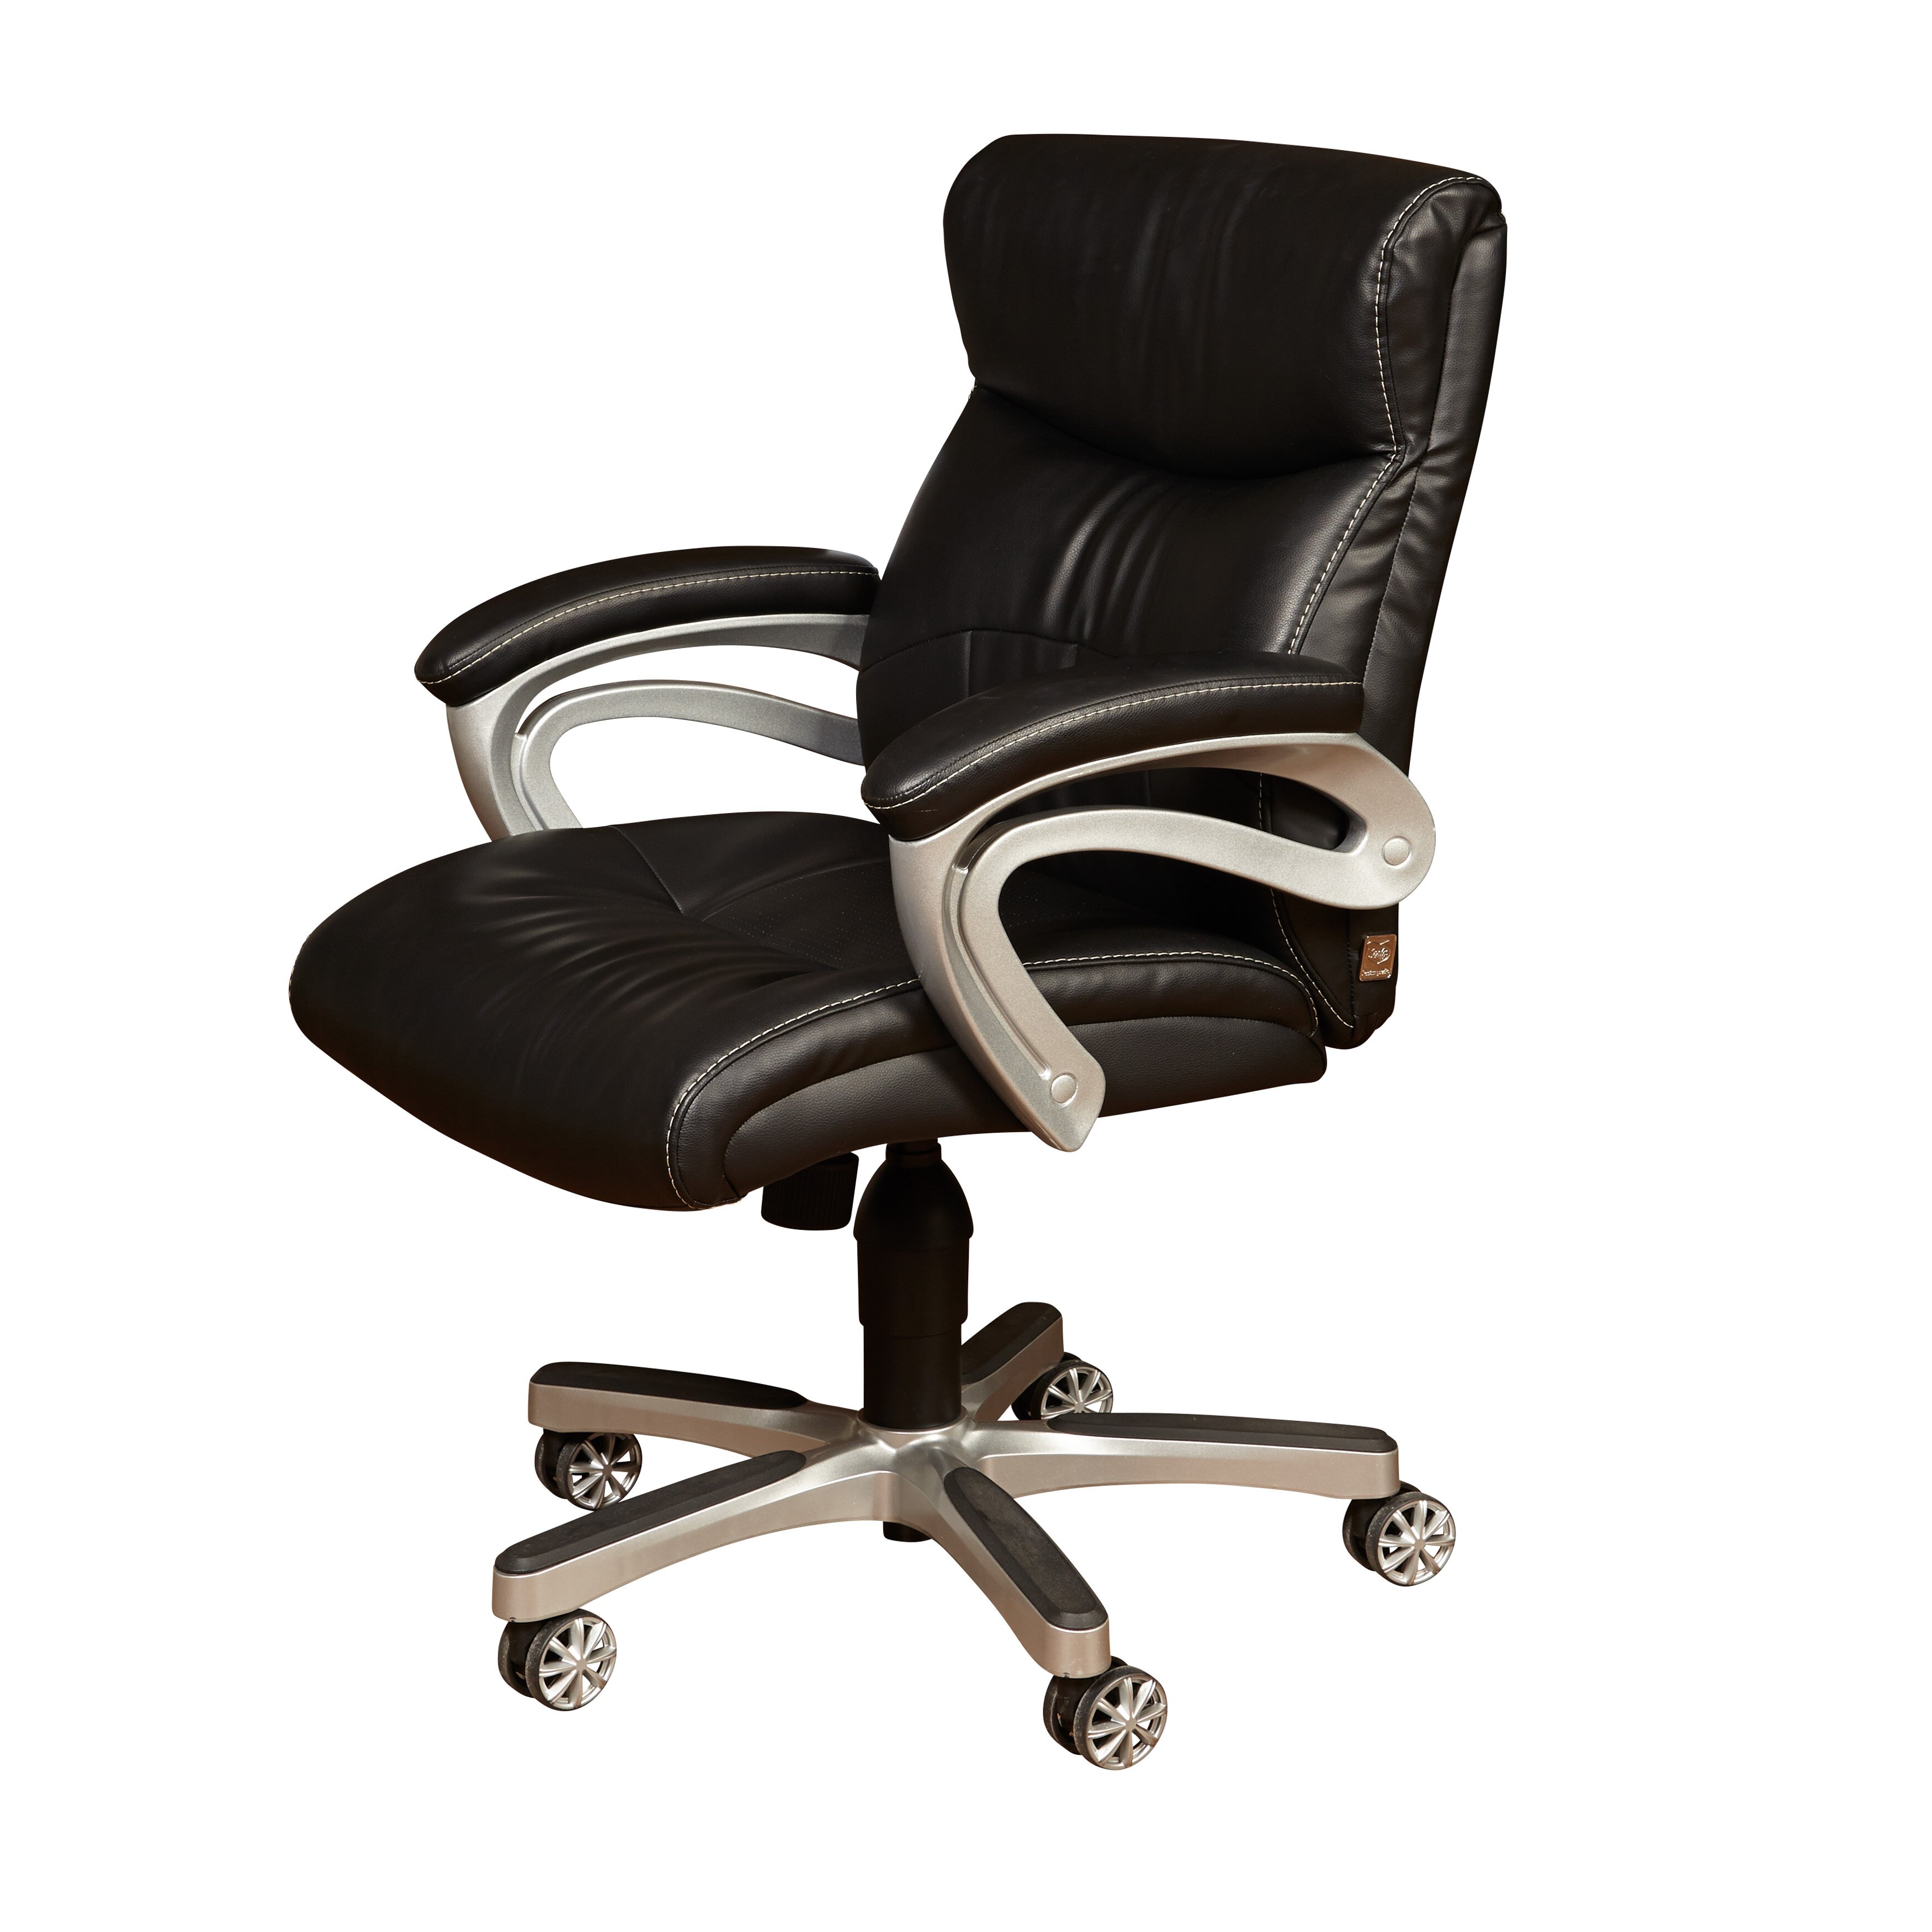 Sealy Posturepedic Office Chair / Sealy Posturepedic Executive Lowback